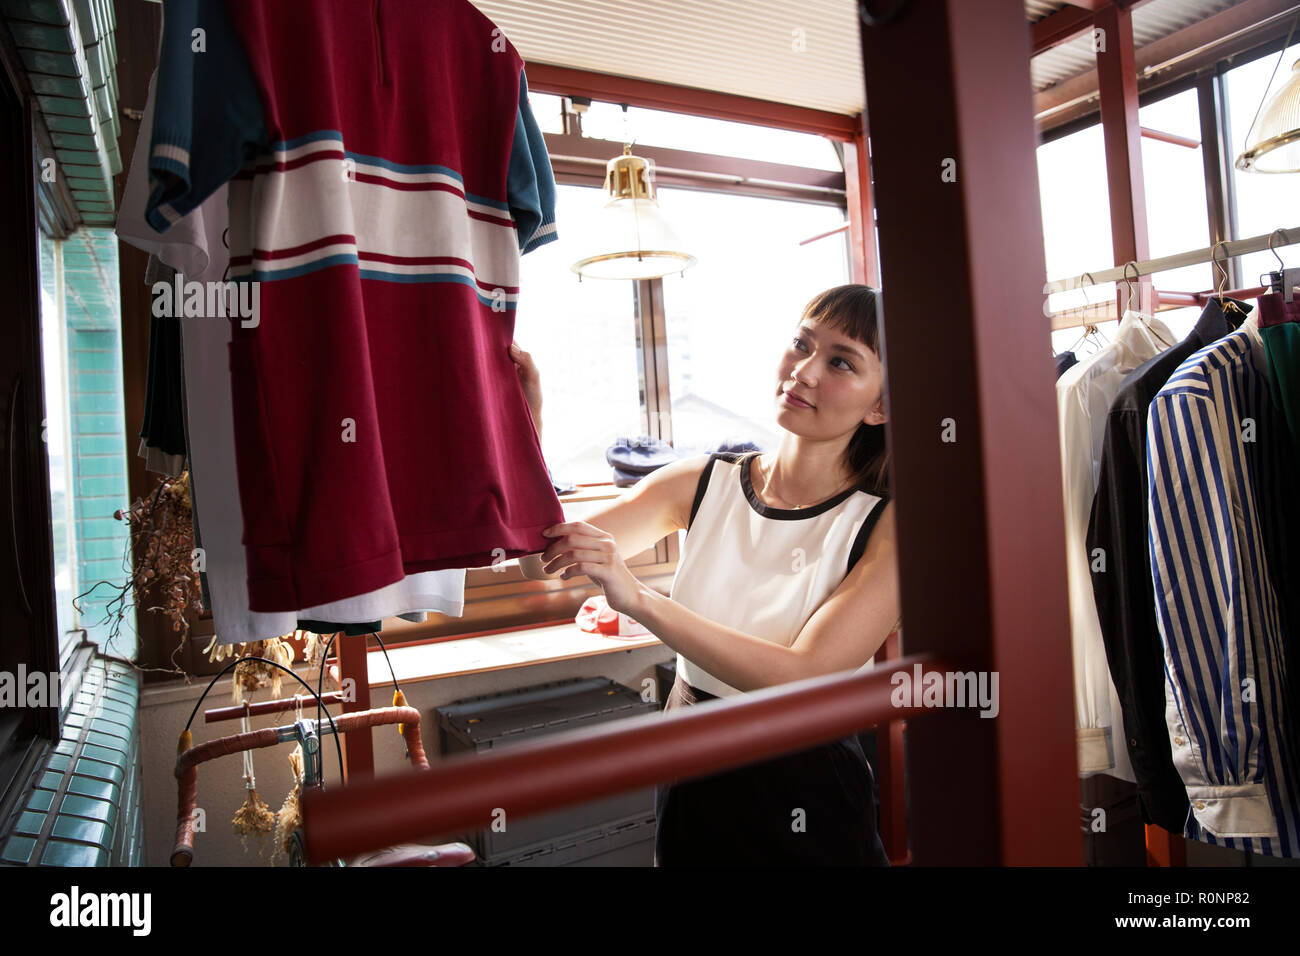 Smiling Japanese saleswoman standing in clothing store, looking at shirt. Stock Photo